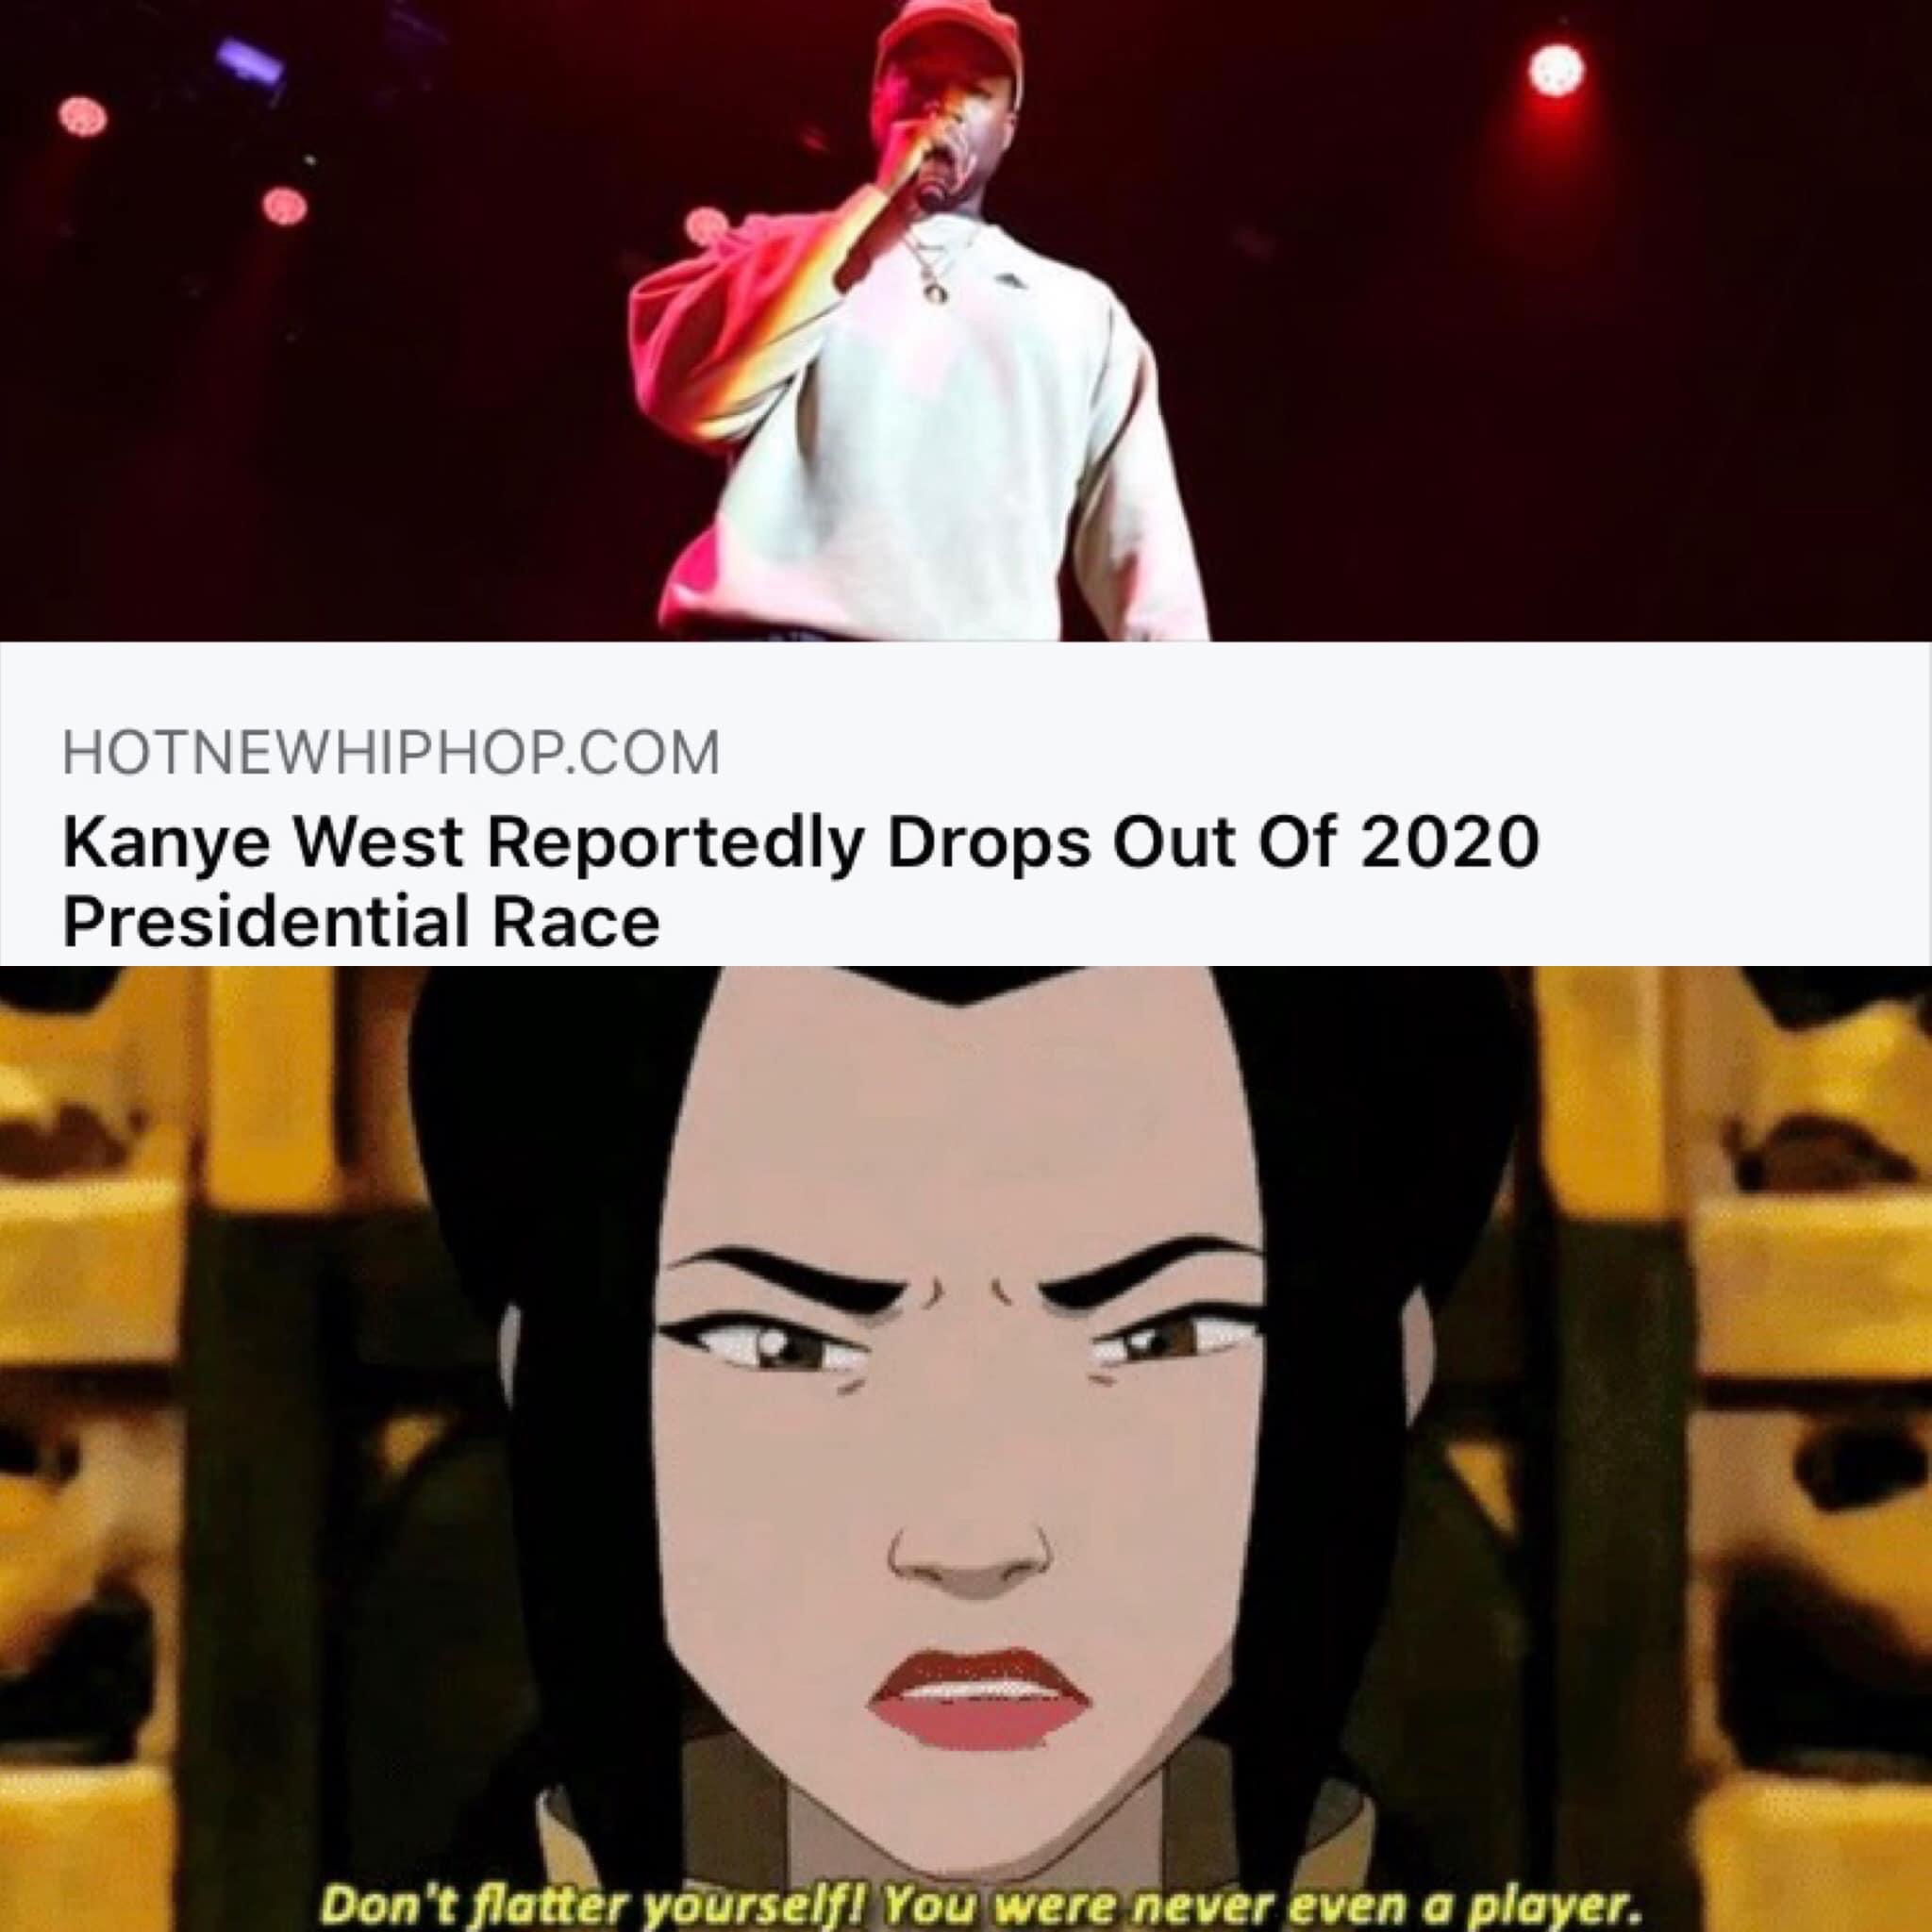 album cover - Hotnewhiphop.Com Kanye West Reportedly Drops Out Of 2020 Presidential Race Don't flatter yourself! You were never even a player.